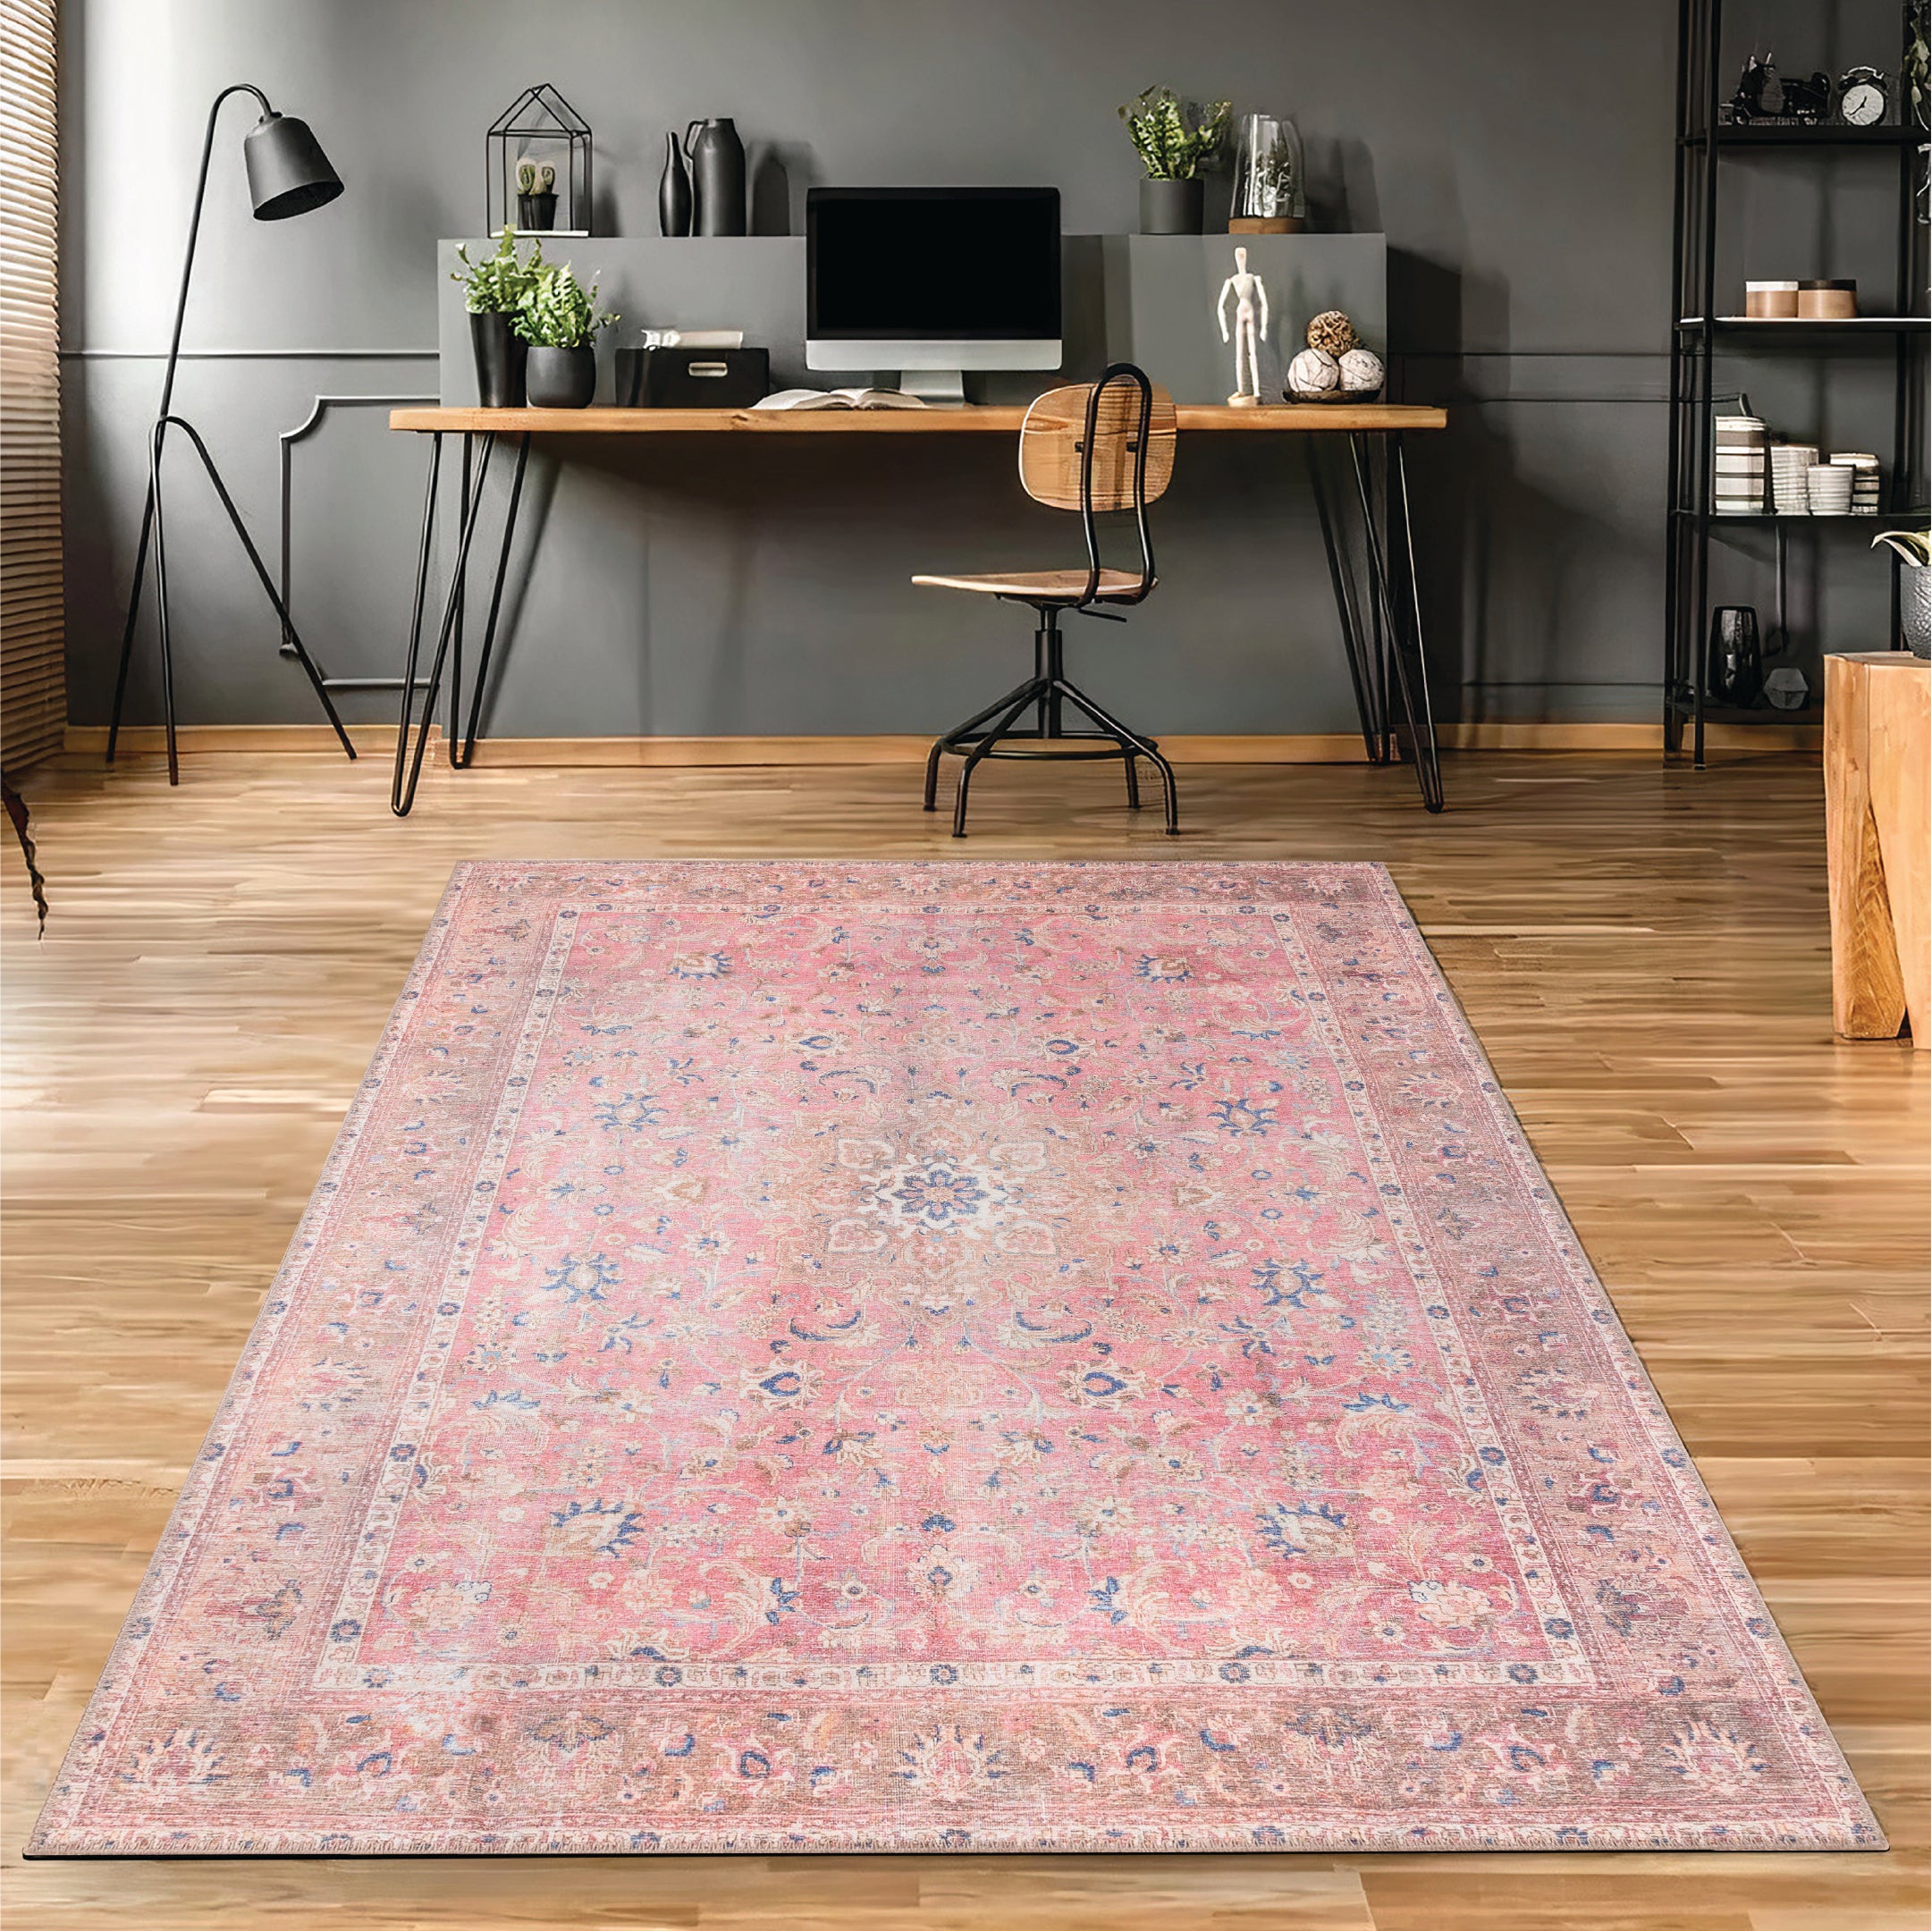 /products/camelot-washable-rug-coral-multicolor